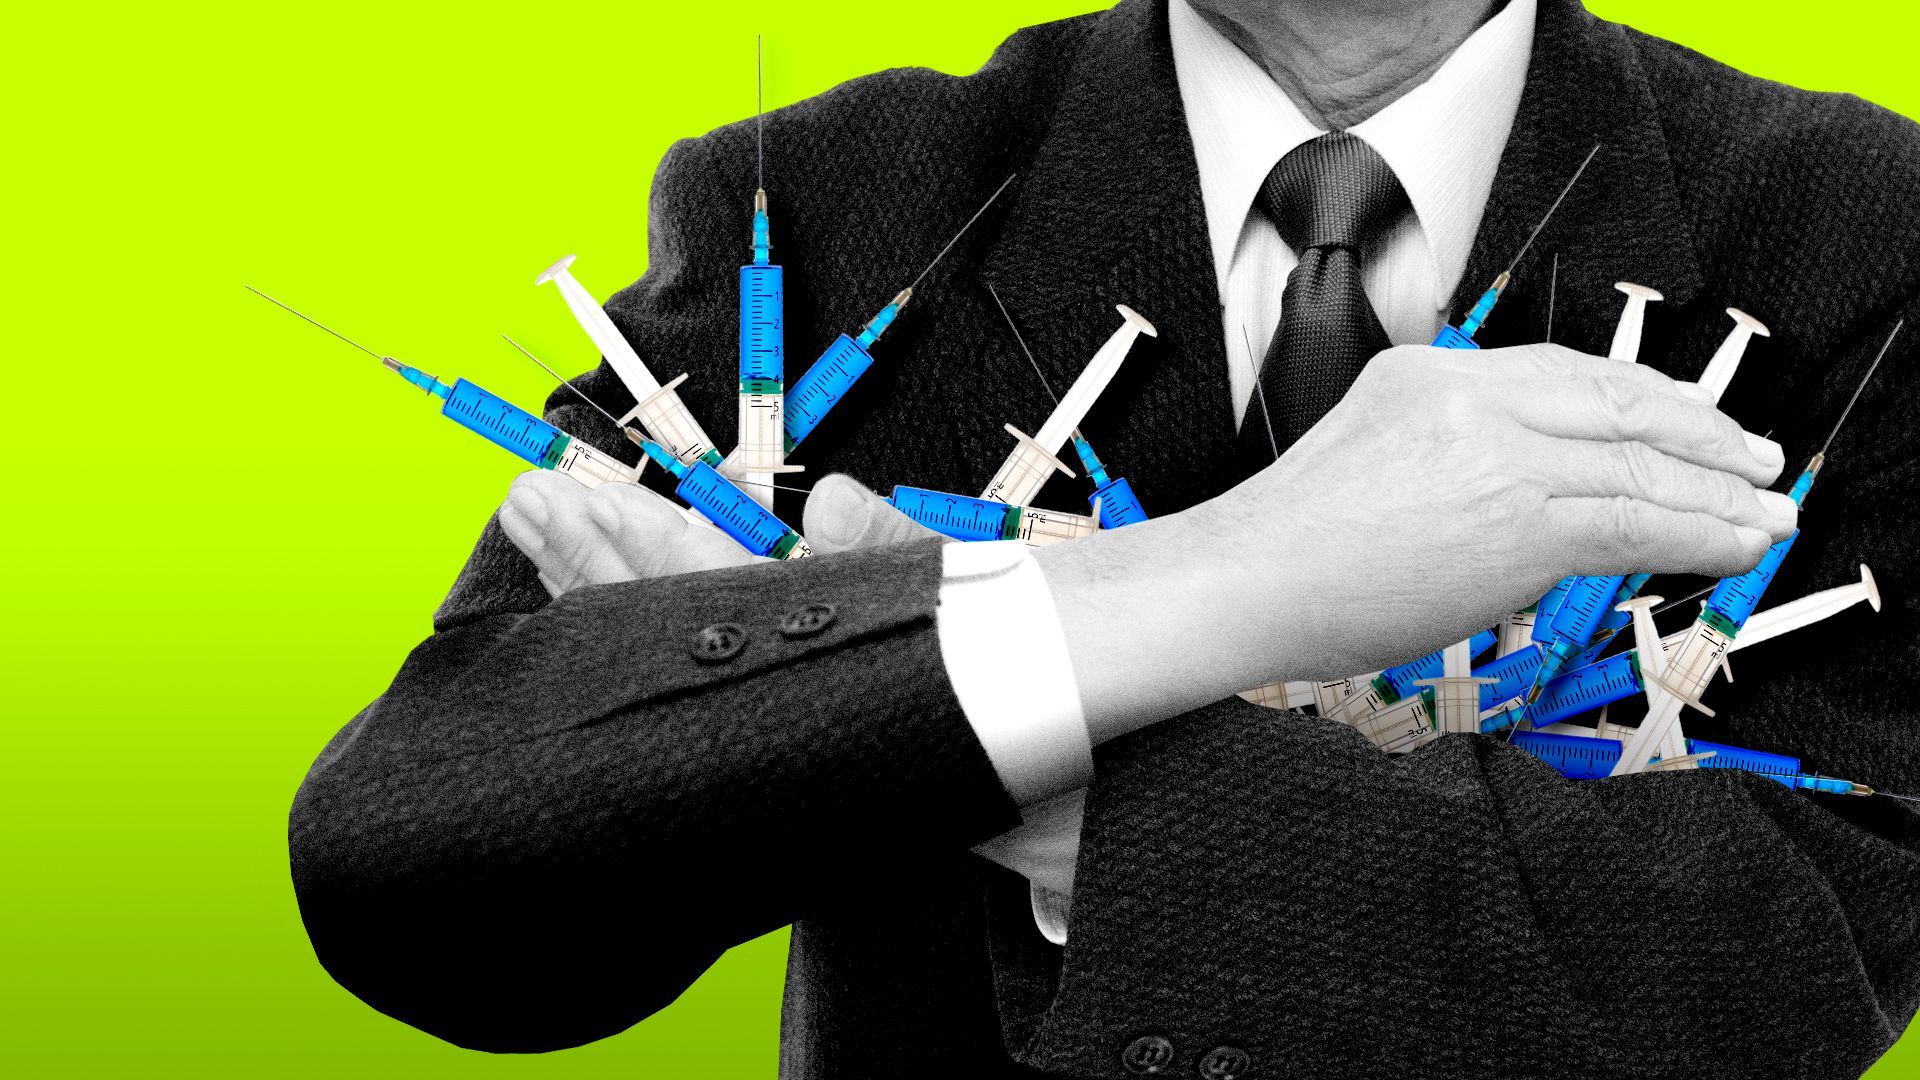 Illustration of a person cradling many vaccine syringes in their arms